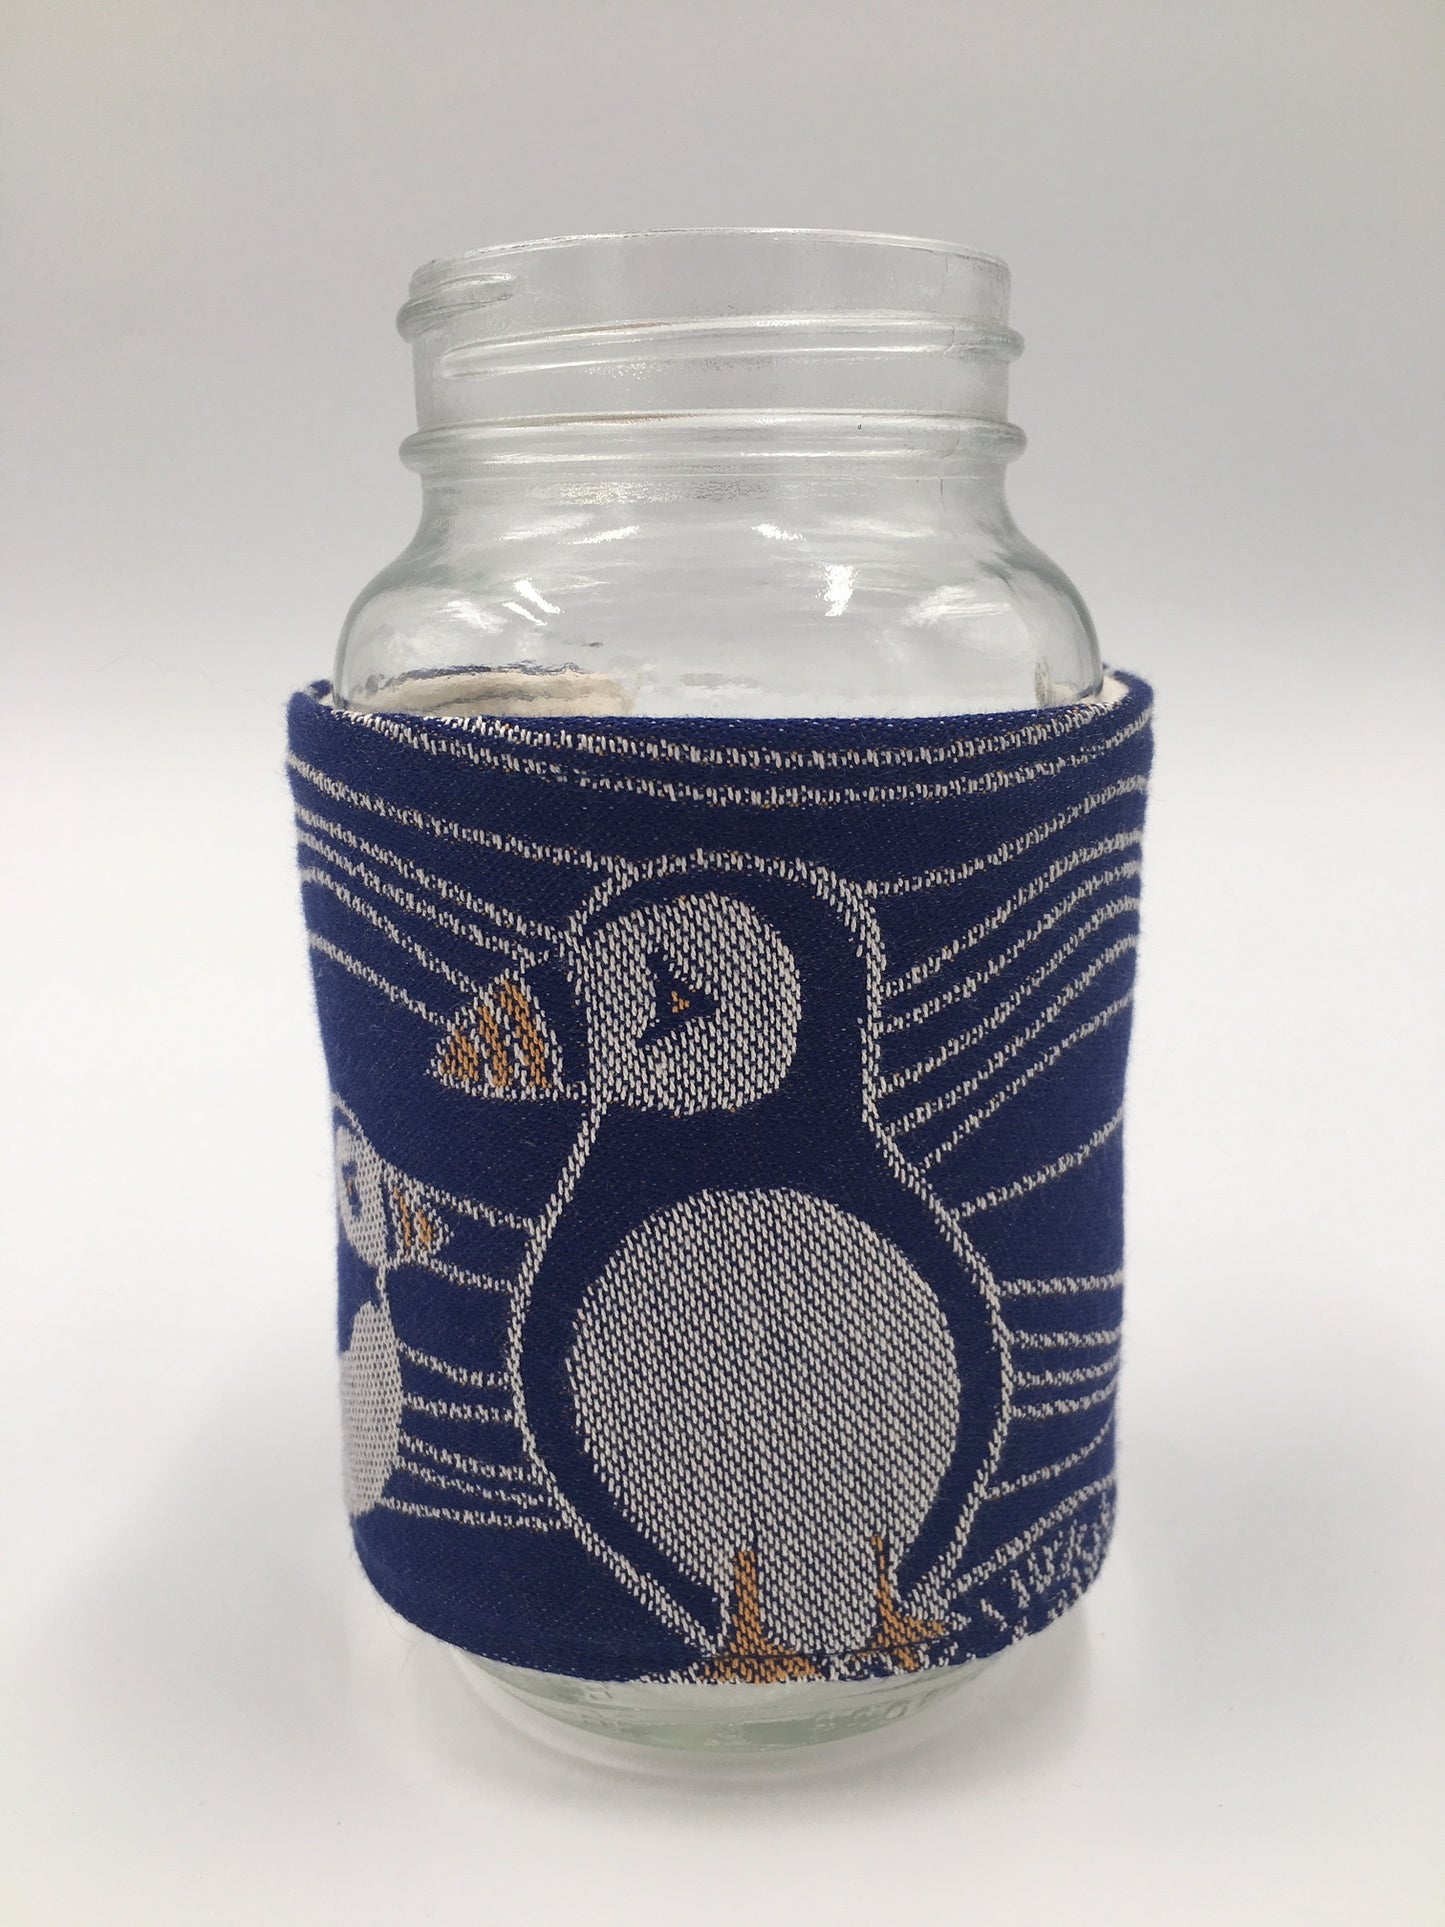 Image of a handmade jar and mug cozy featuring oscha slings puffins woven fabric in deep blue, ivory, and orange and elegant and realistic puffin embroidery. 